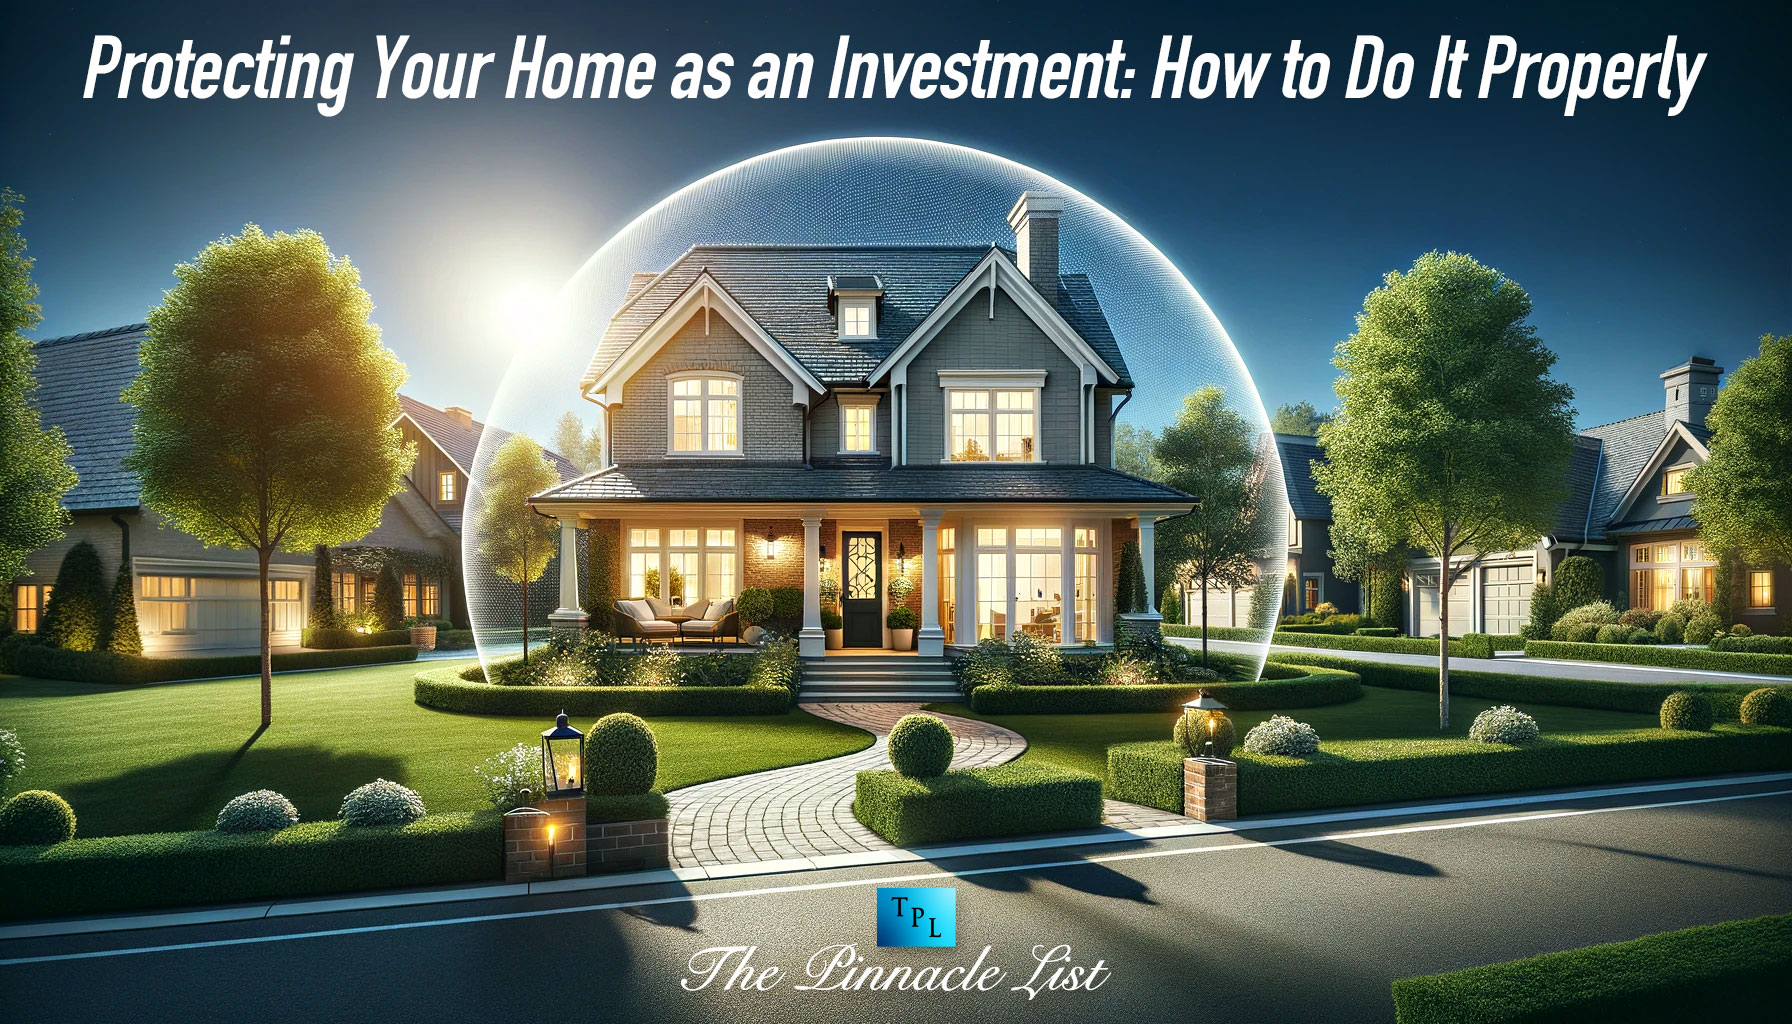 Protecting Your Home as an Investment: How to Do It Properly